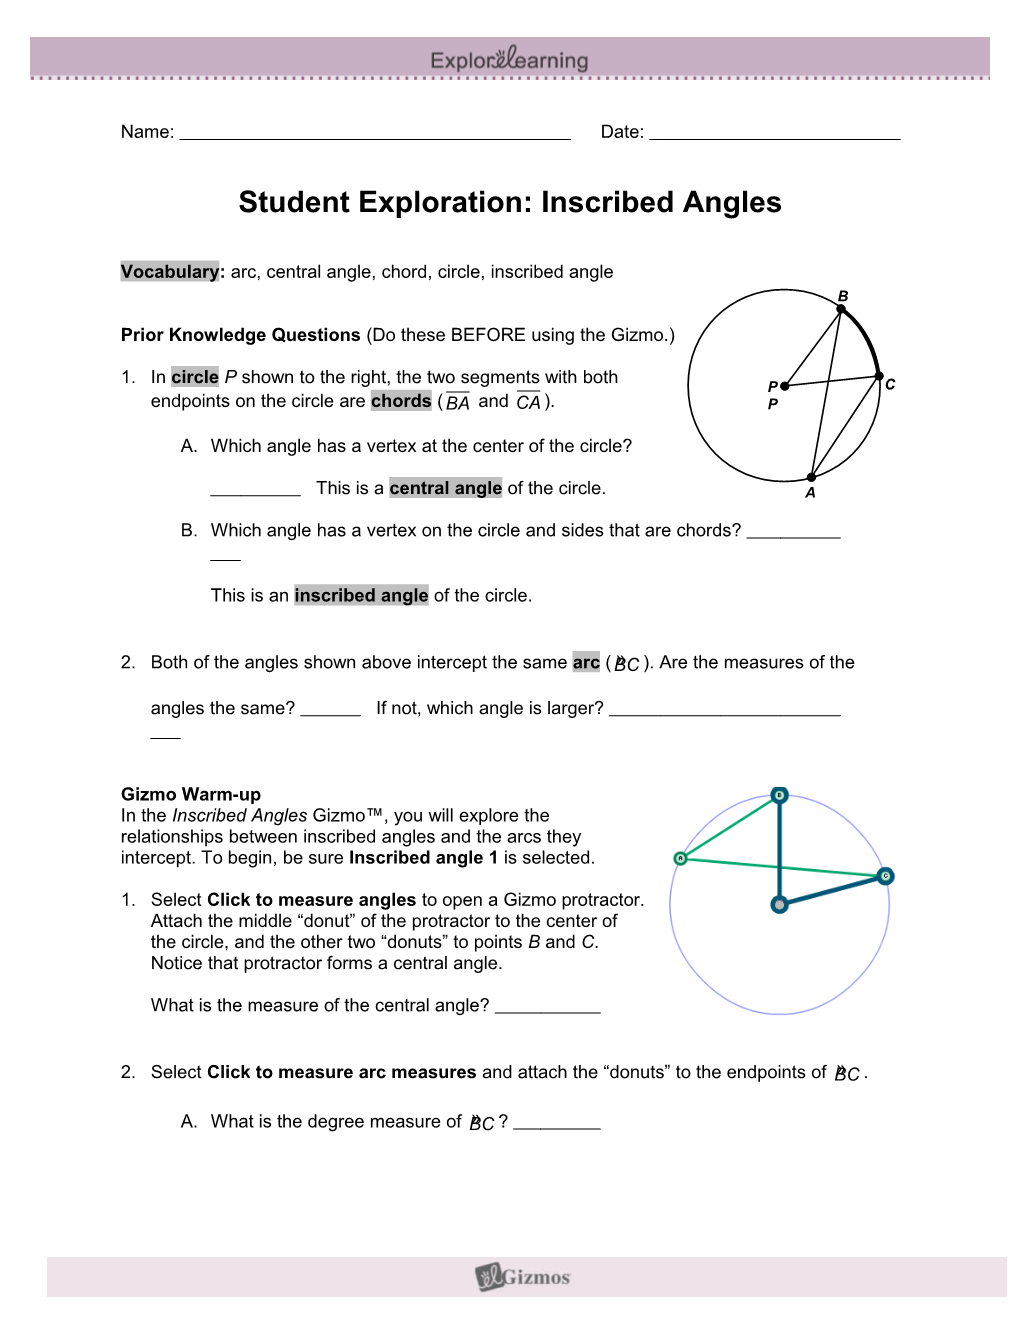 Student Exploration: Inscribed Angles